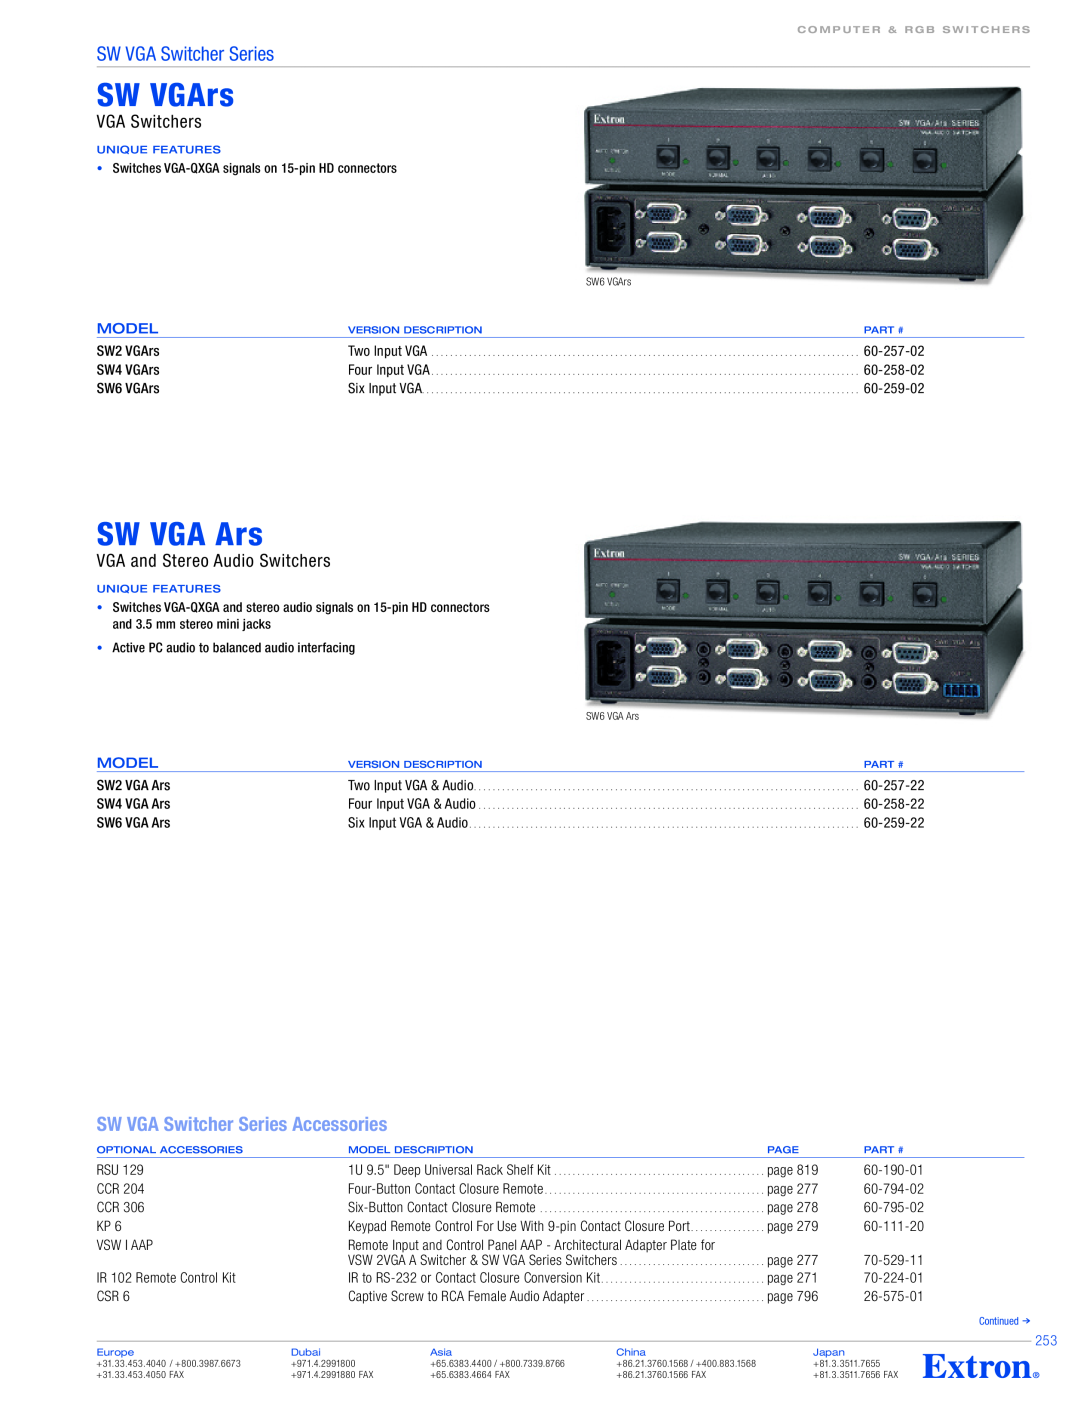 Extron electronic SW VGA Series specifications SW VGArs, SW VGA Ars, SW VGA Switcher Series, VGA Switchers, Model 